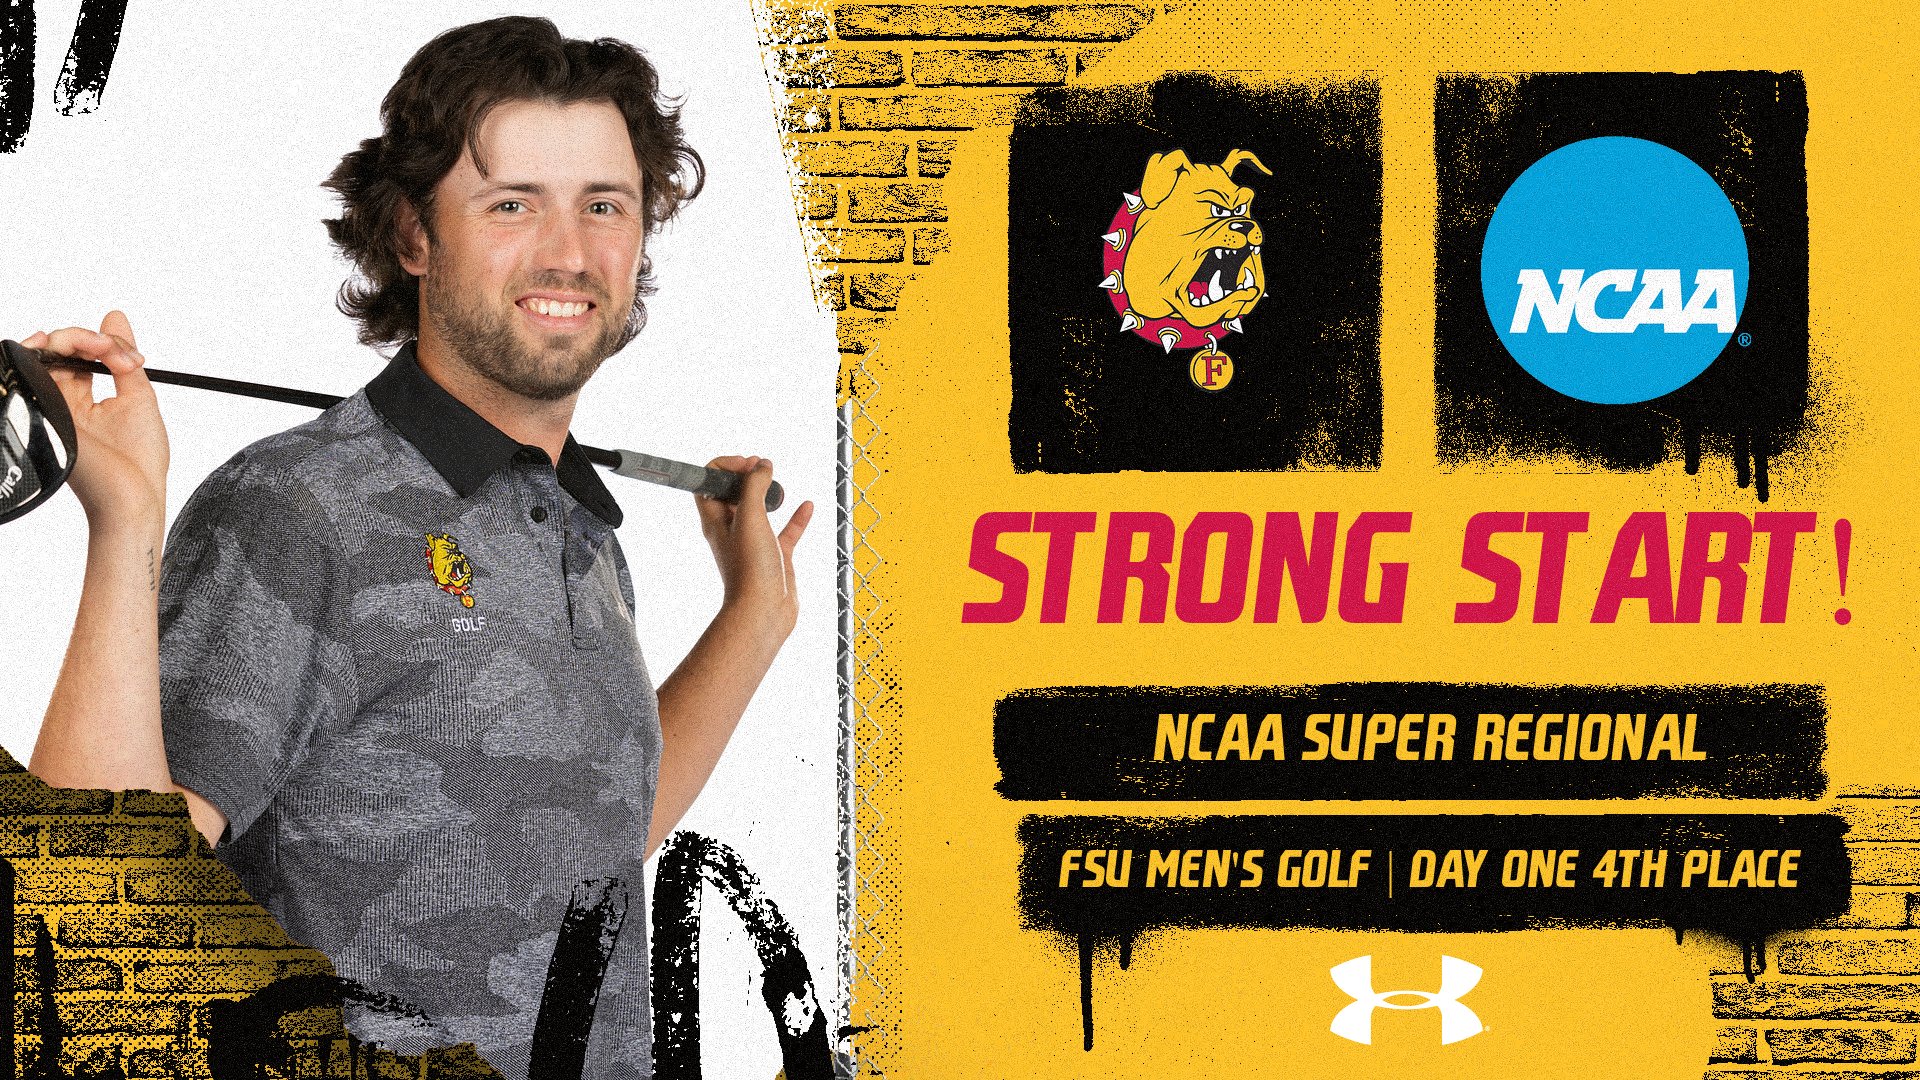 Strong Start For Ferris State Men's Golf On Day One At NCAA Super Regional